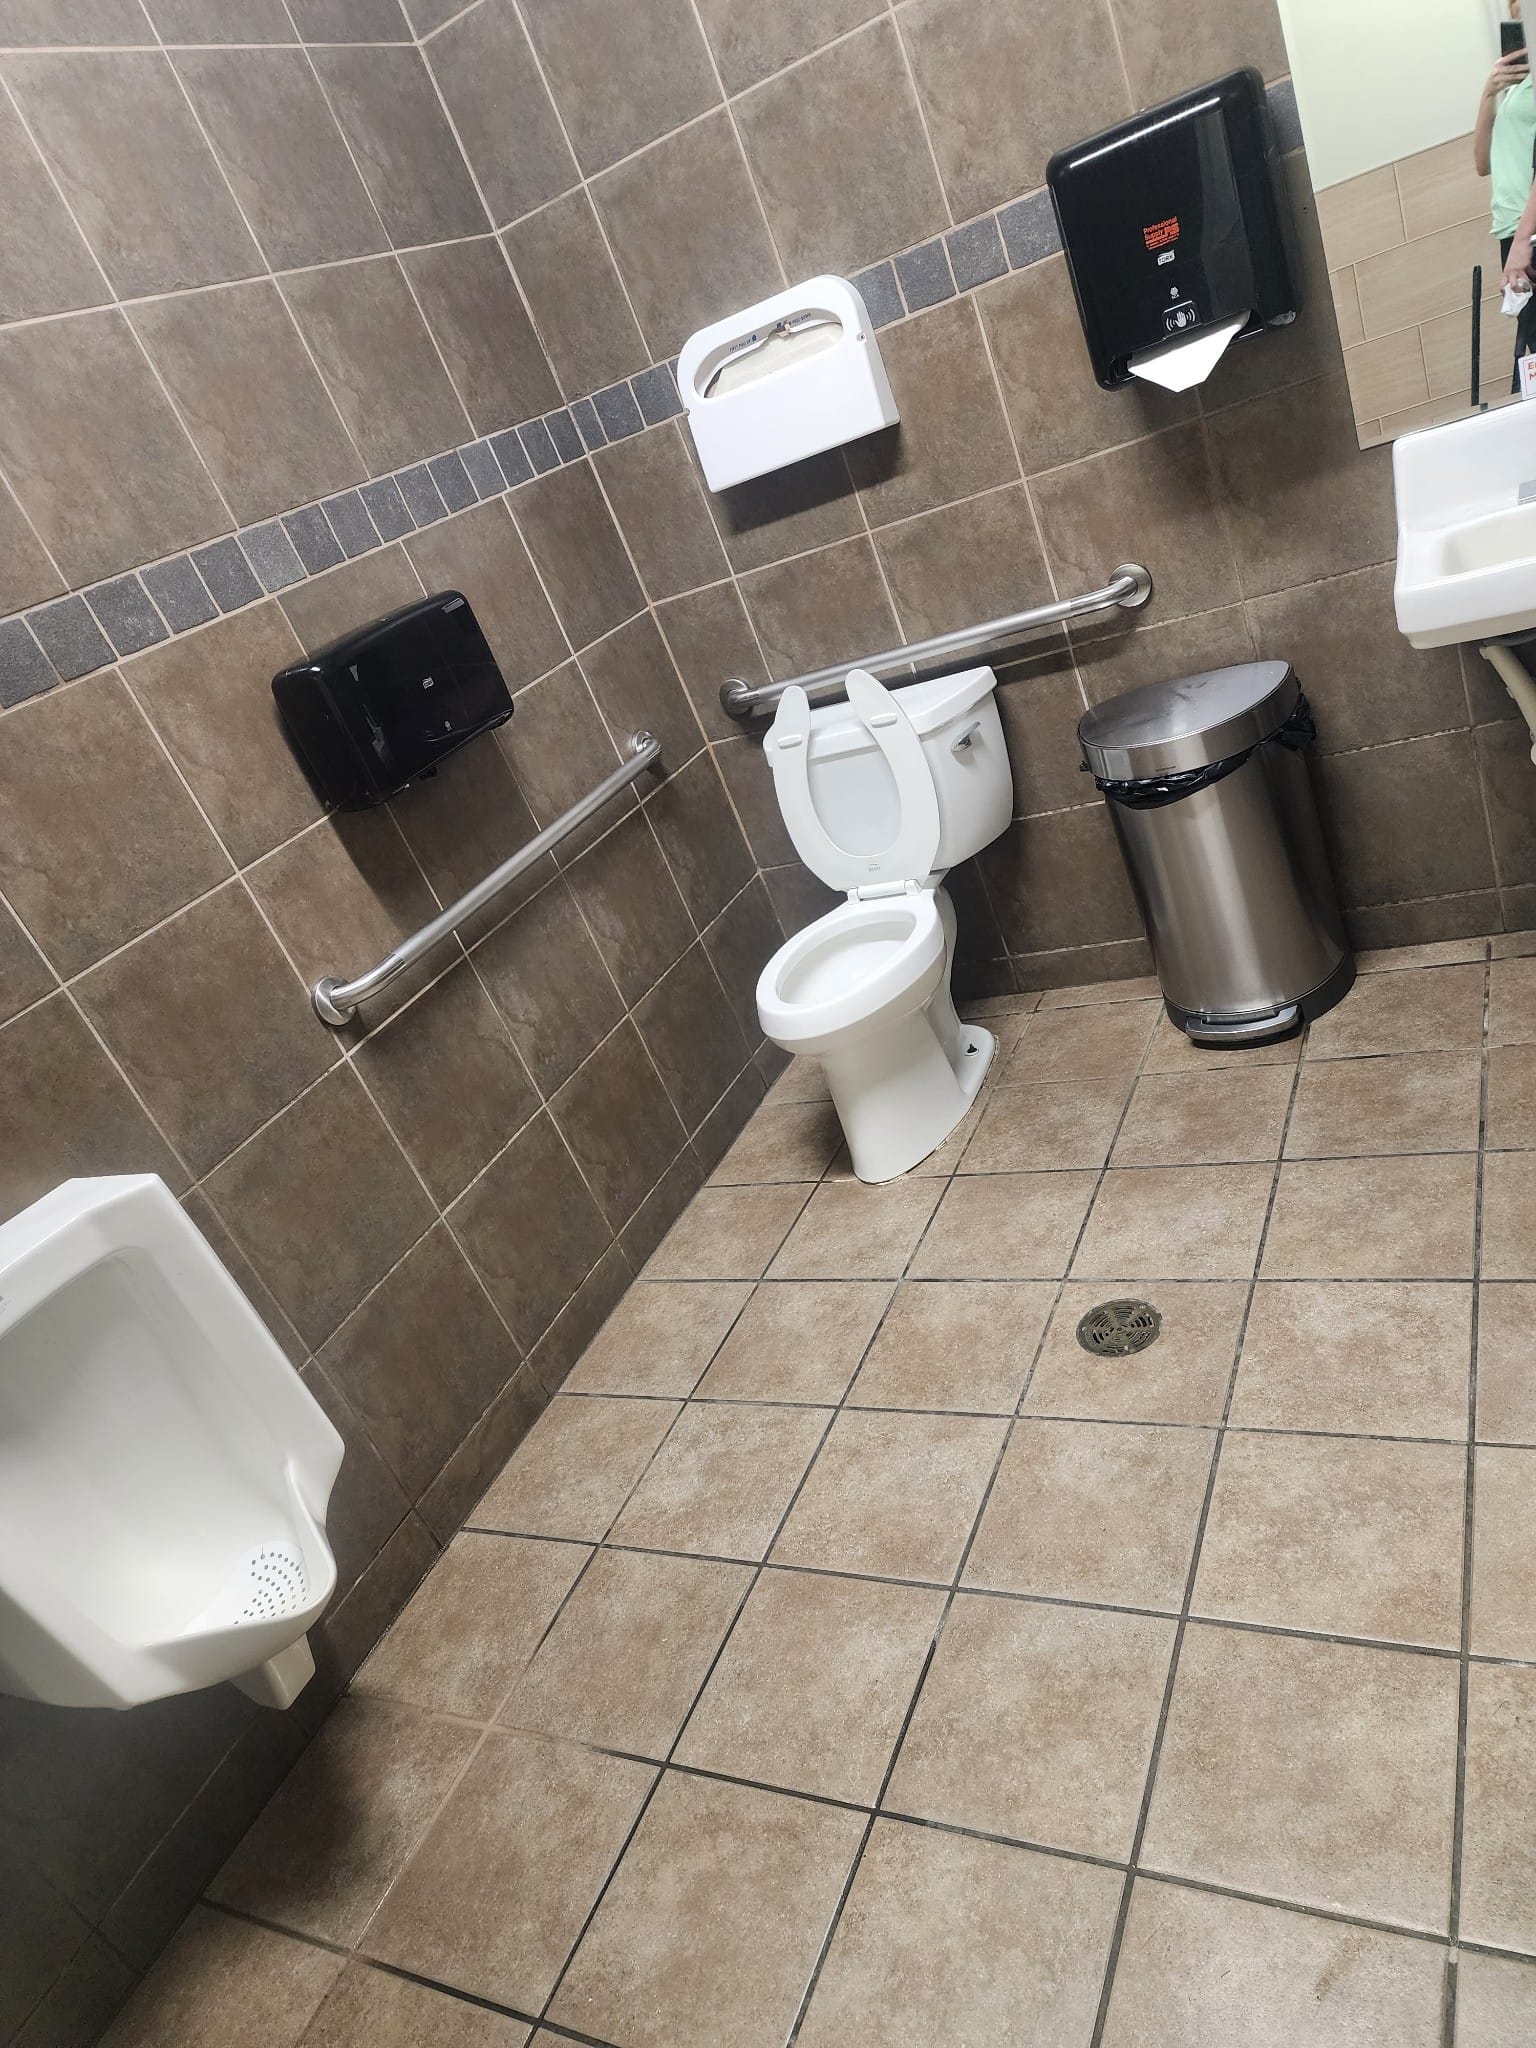 A bathroom at a restaurant that we cleaned